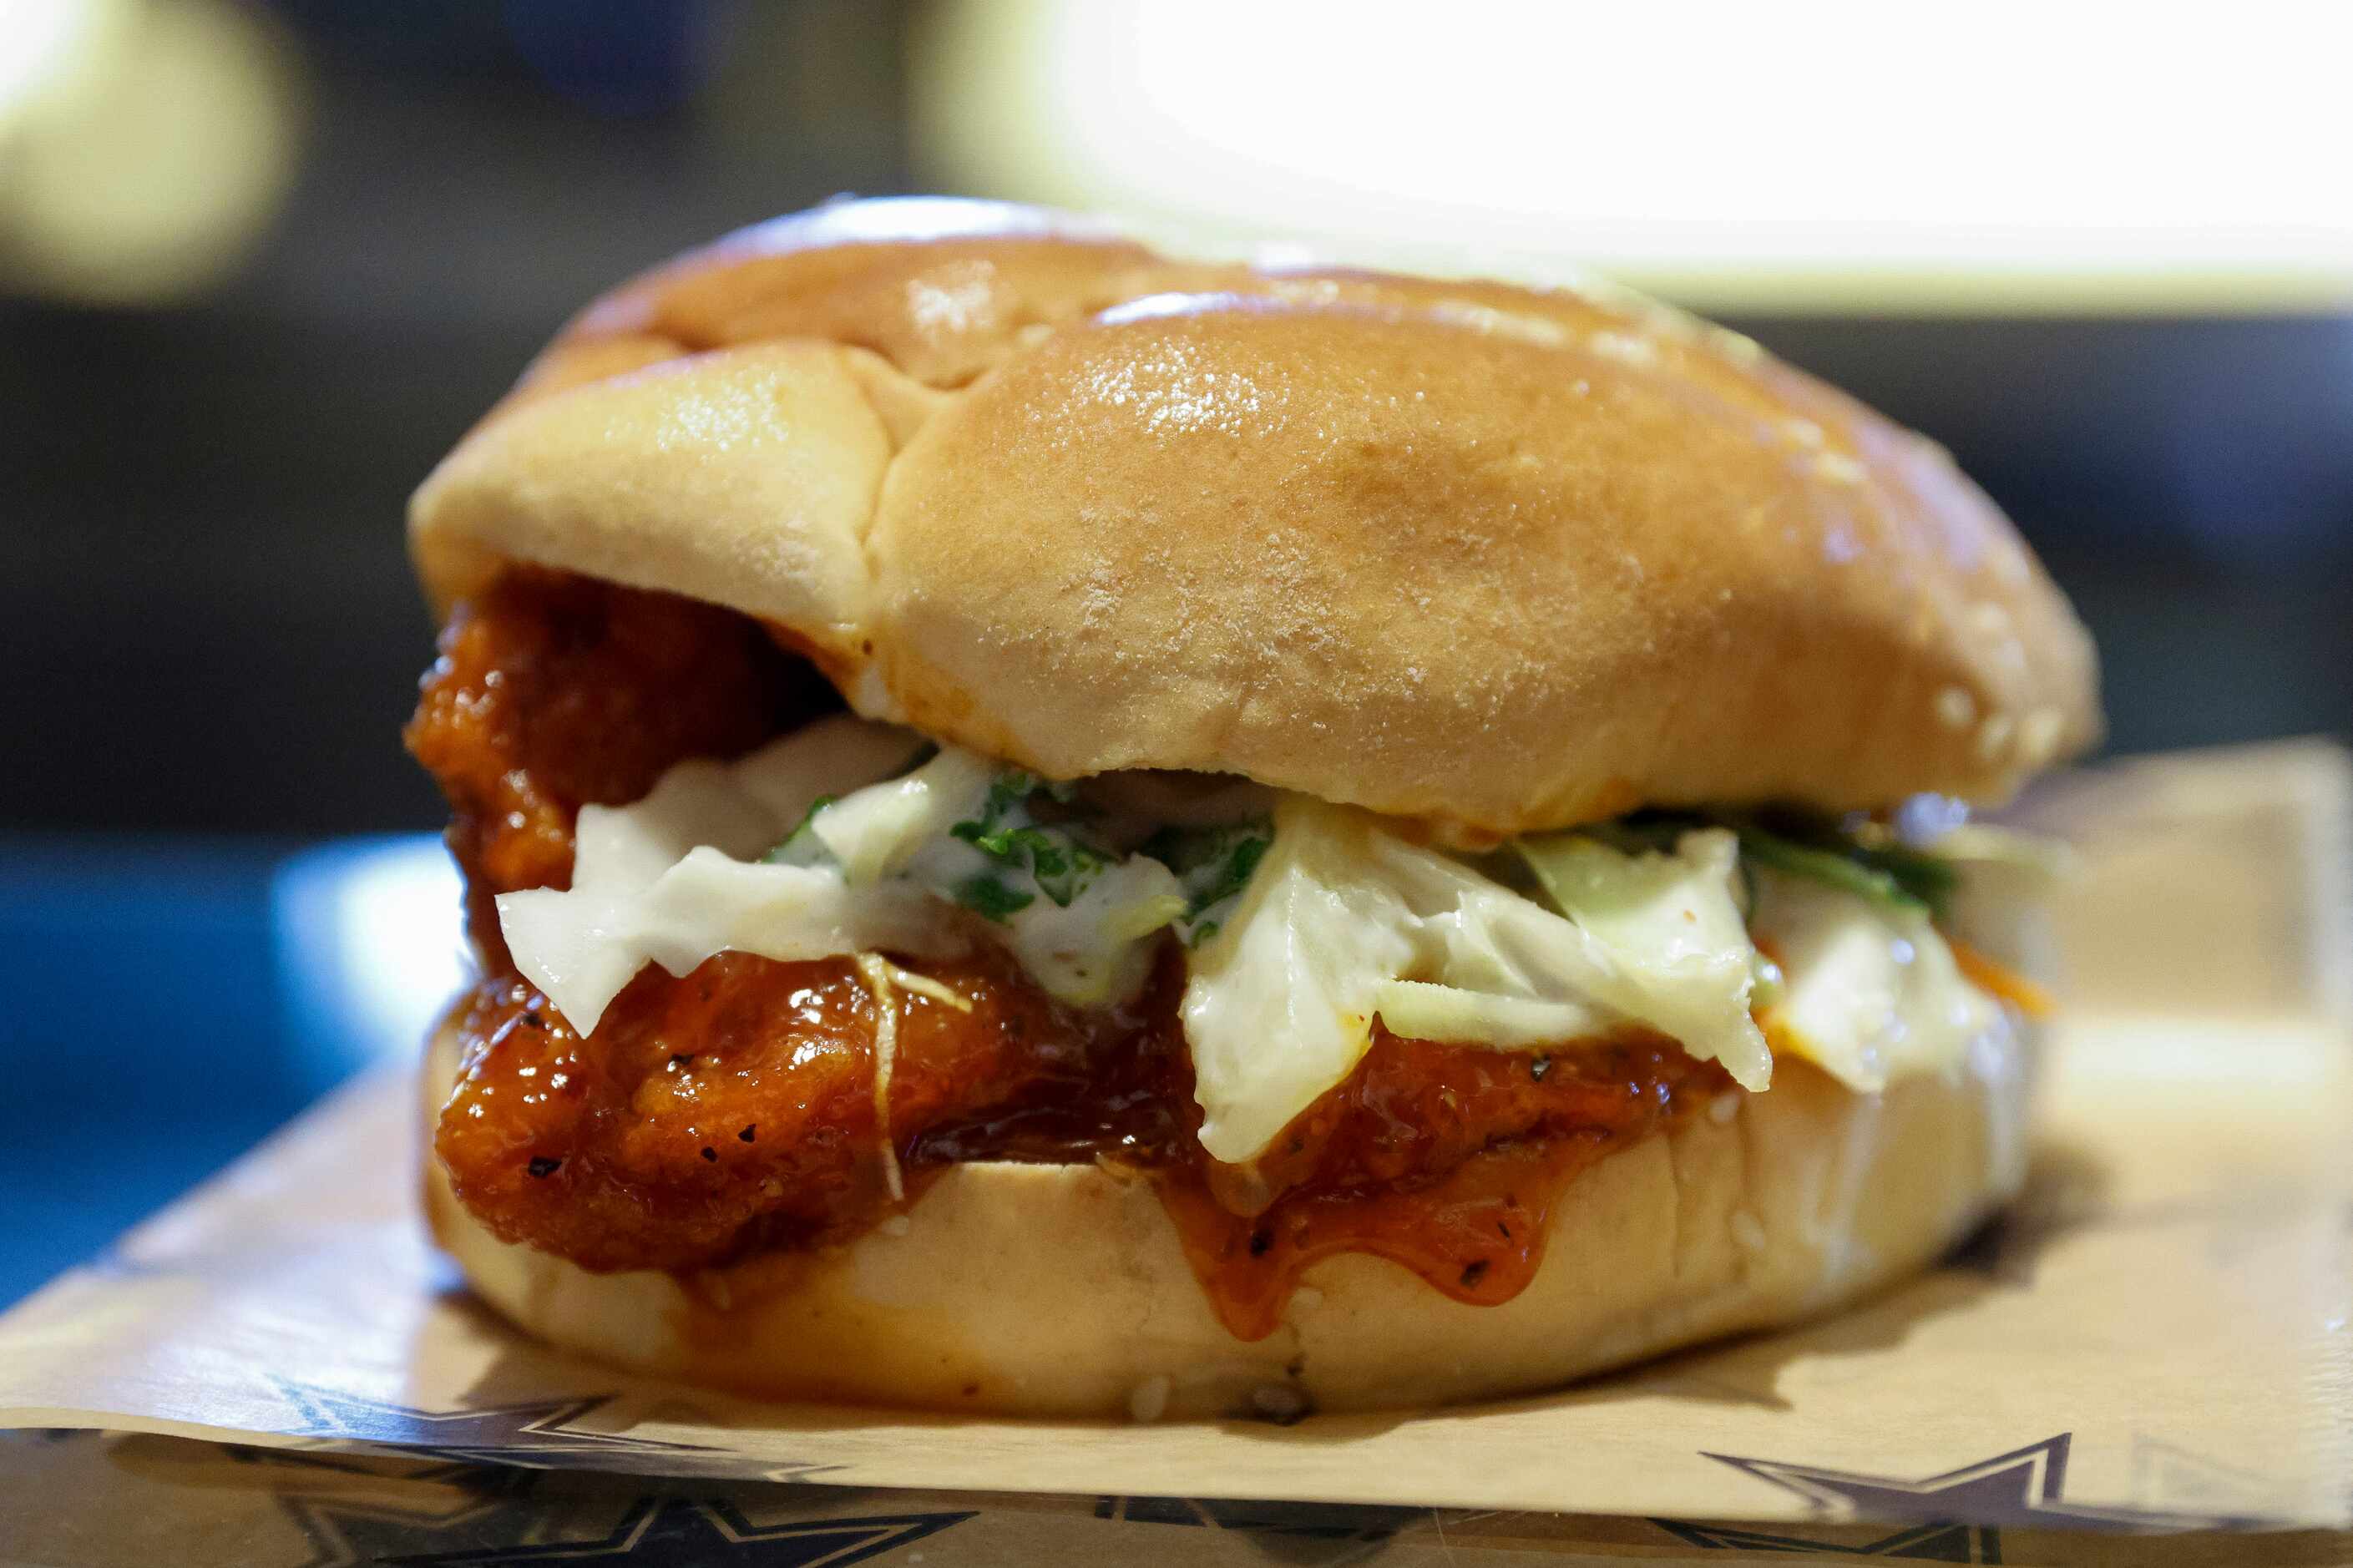 A mango habanero chicken sandwich with pineapple slaw joins the menu for the Dallas Cowboys...